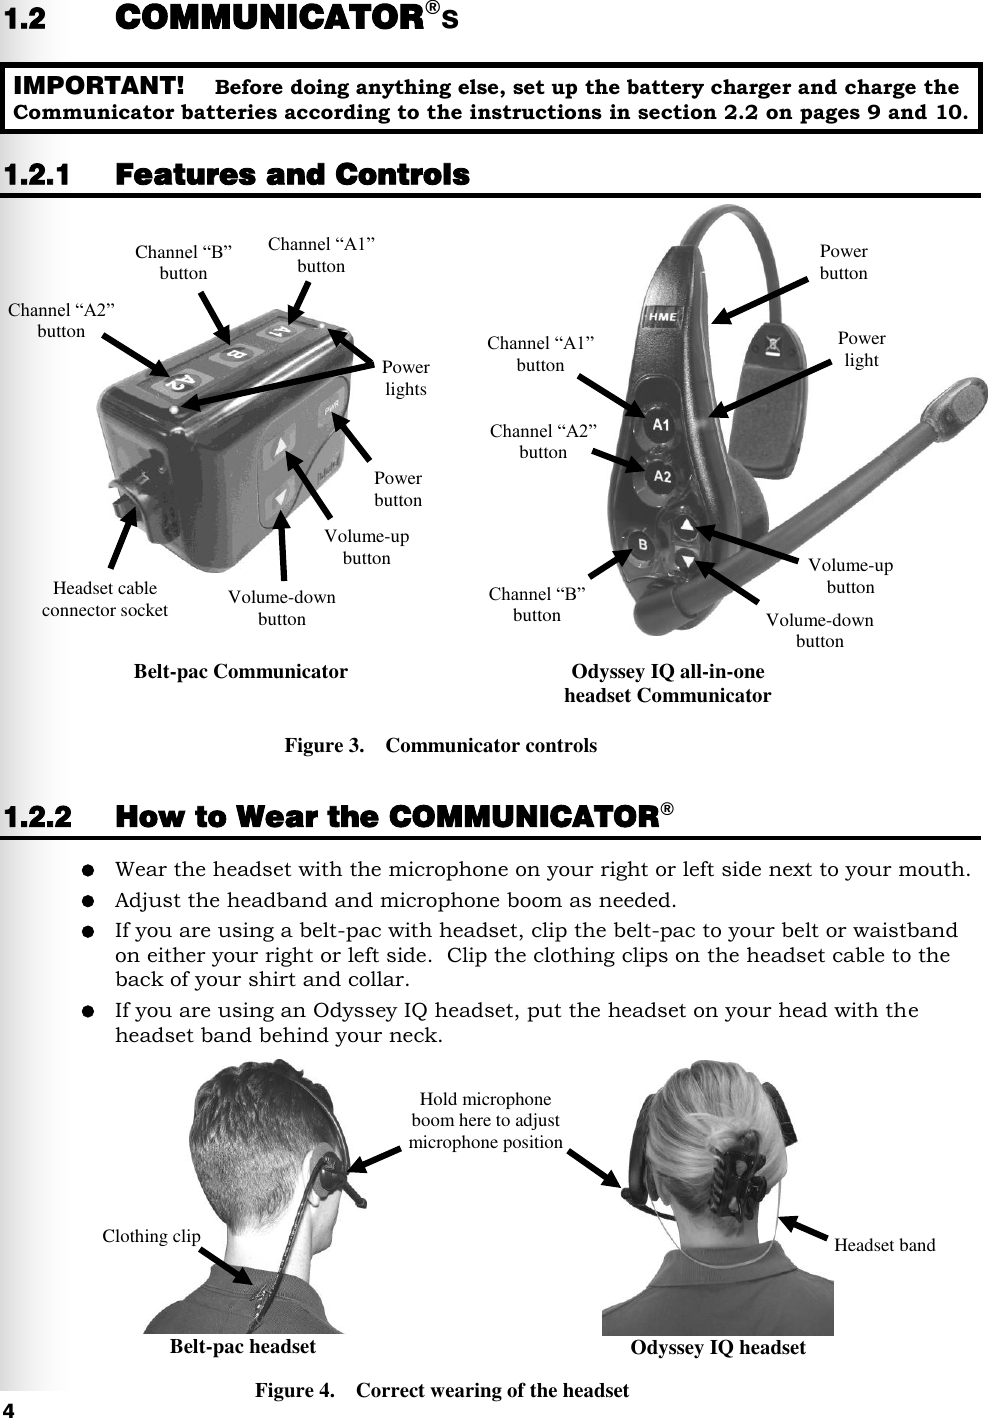   4 1.2 COMMUNICATOR®s  1.2.1 Features and Controls                           1.2.2 How to Wear the COMMUNICATOR®  Wear the headset with the microphone on your right or left side next to your mouth.  Adjust the headband and microphone boom as needed.  If you are using a belt-pac with headset, clip the belt-pac to your belt or waistband on either your right or left side.  Clip the clothing clips on the headset cable to the back of your shirt and collar.  If you are using an Odyssey IQ headset, put the headset on your head with the headset band behind your neck.    Figure 3.    Communicator controls Figure 4.    Correct wearing of the headset IMPORTANT!    Before doing anything else, set up the battery charger and charge the Communicator batteries according to the instructions in section 2.2 on pages 9 and 10. Belt-pac Communicator Odyssey IQ all-in-one headset Communicator Belt-pac headset Odyssey IQ headset Headset band Hold microphone boom here to adjust microphone position Clothing clip Channel “A1” button Channel “B” button Channel “A2” button Volume-up button Volume-down button Power button Power light Channel “A1” button Channel “B” button Power button Volume-down button Channel “A2” button Headset cable connector socket Volume-up button Power lights 